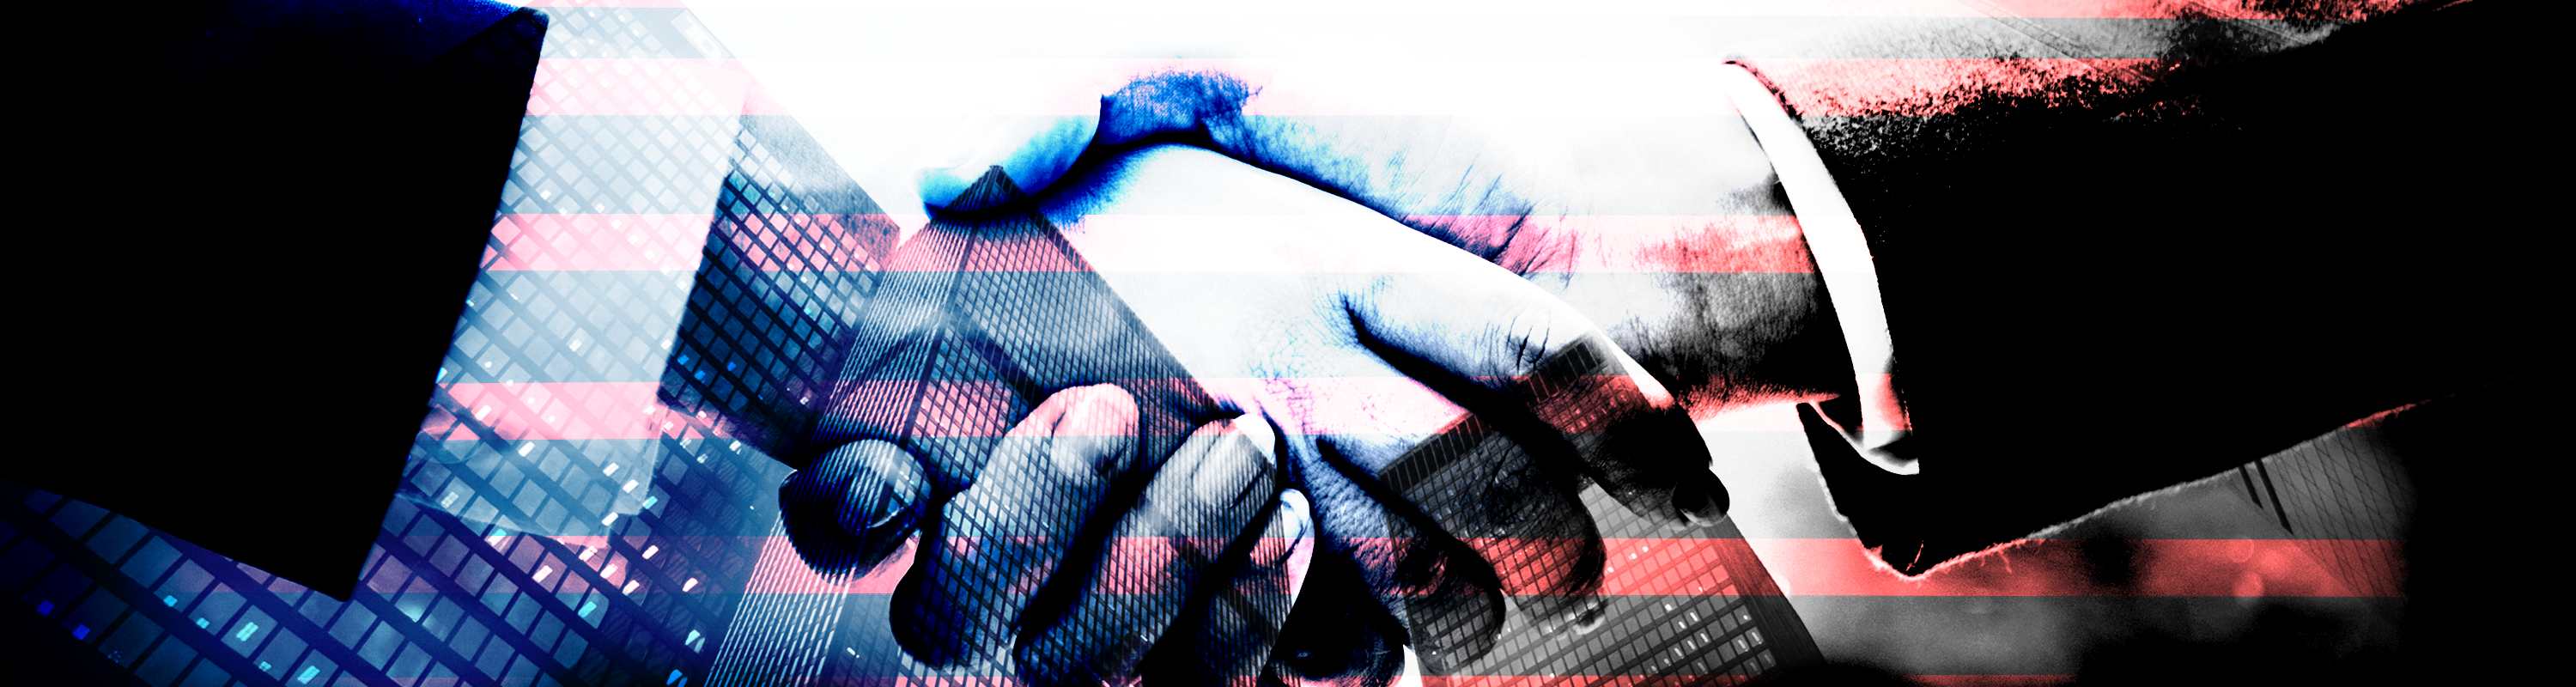 Creepy handshake with corporate and red, white and blue overlay.